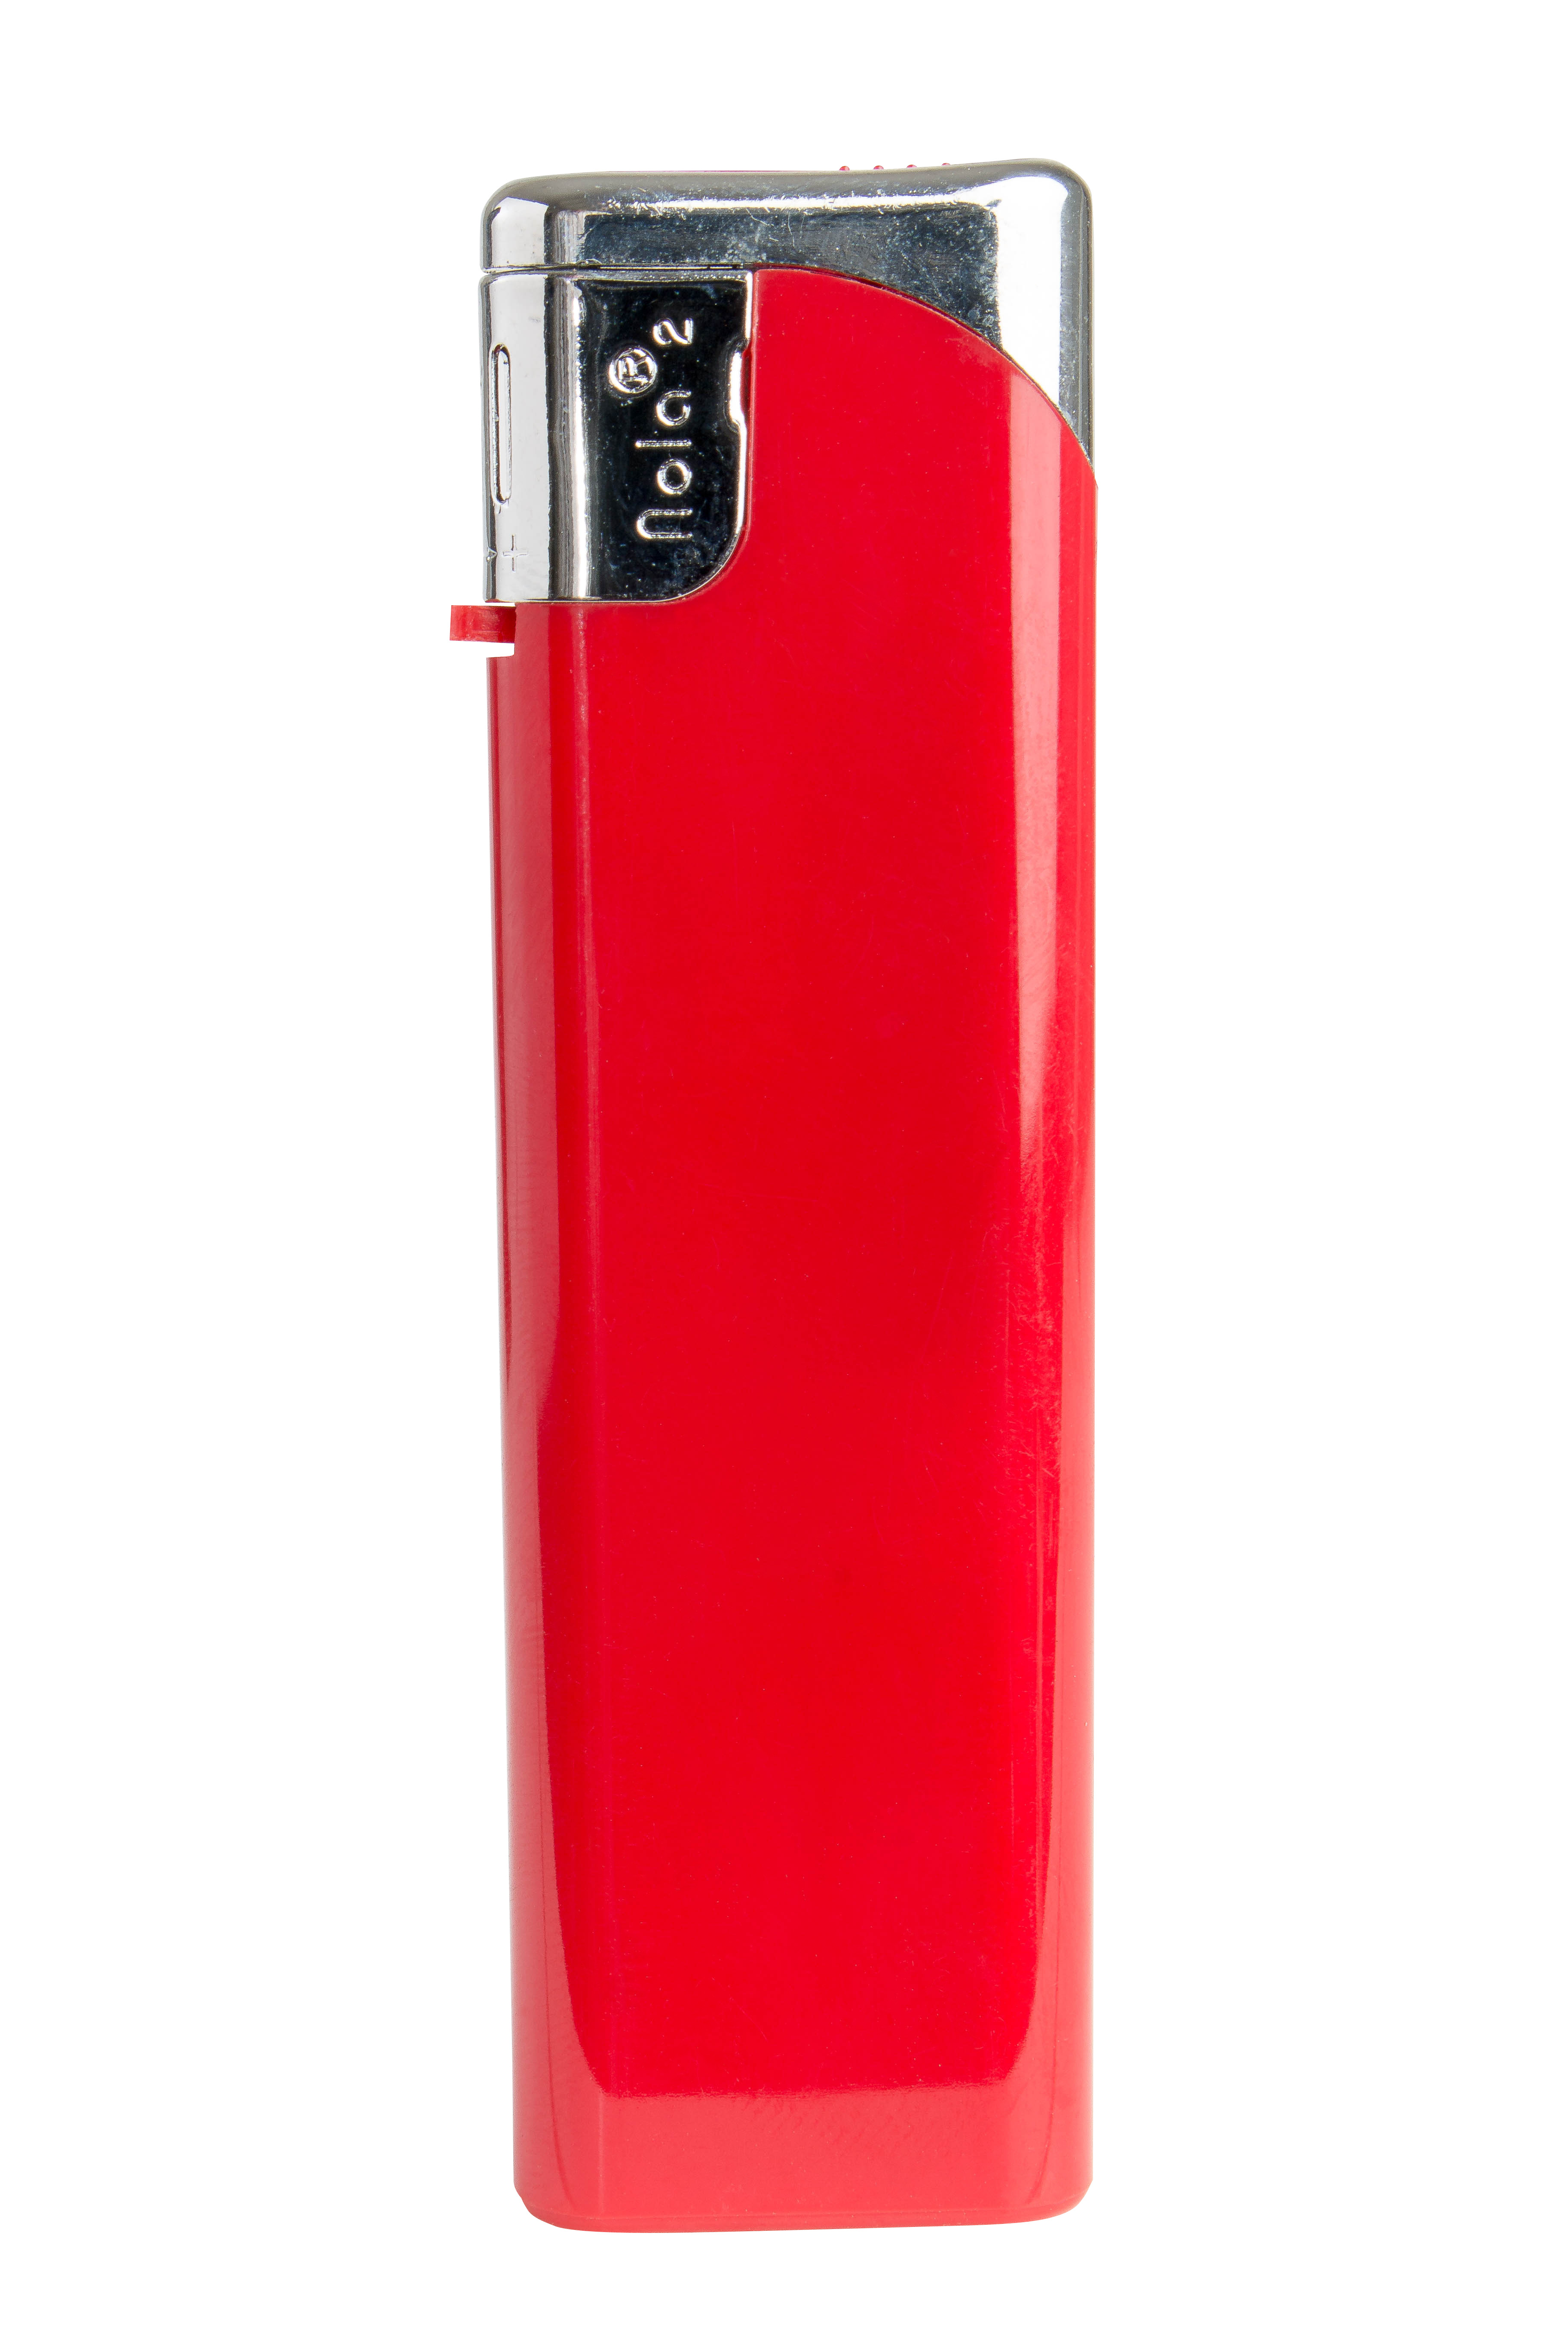 Nola 2 PIEZO lighter red refillable body shiny red, cap chrome, pusher red